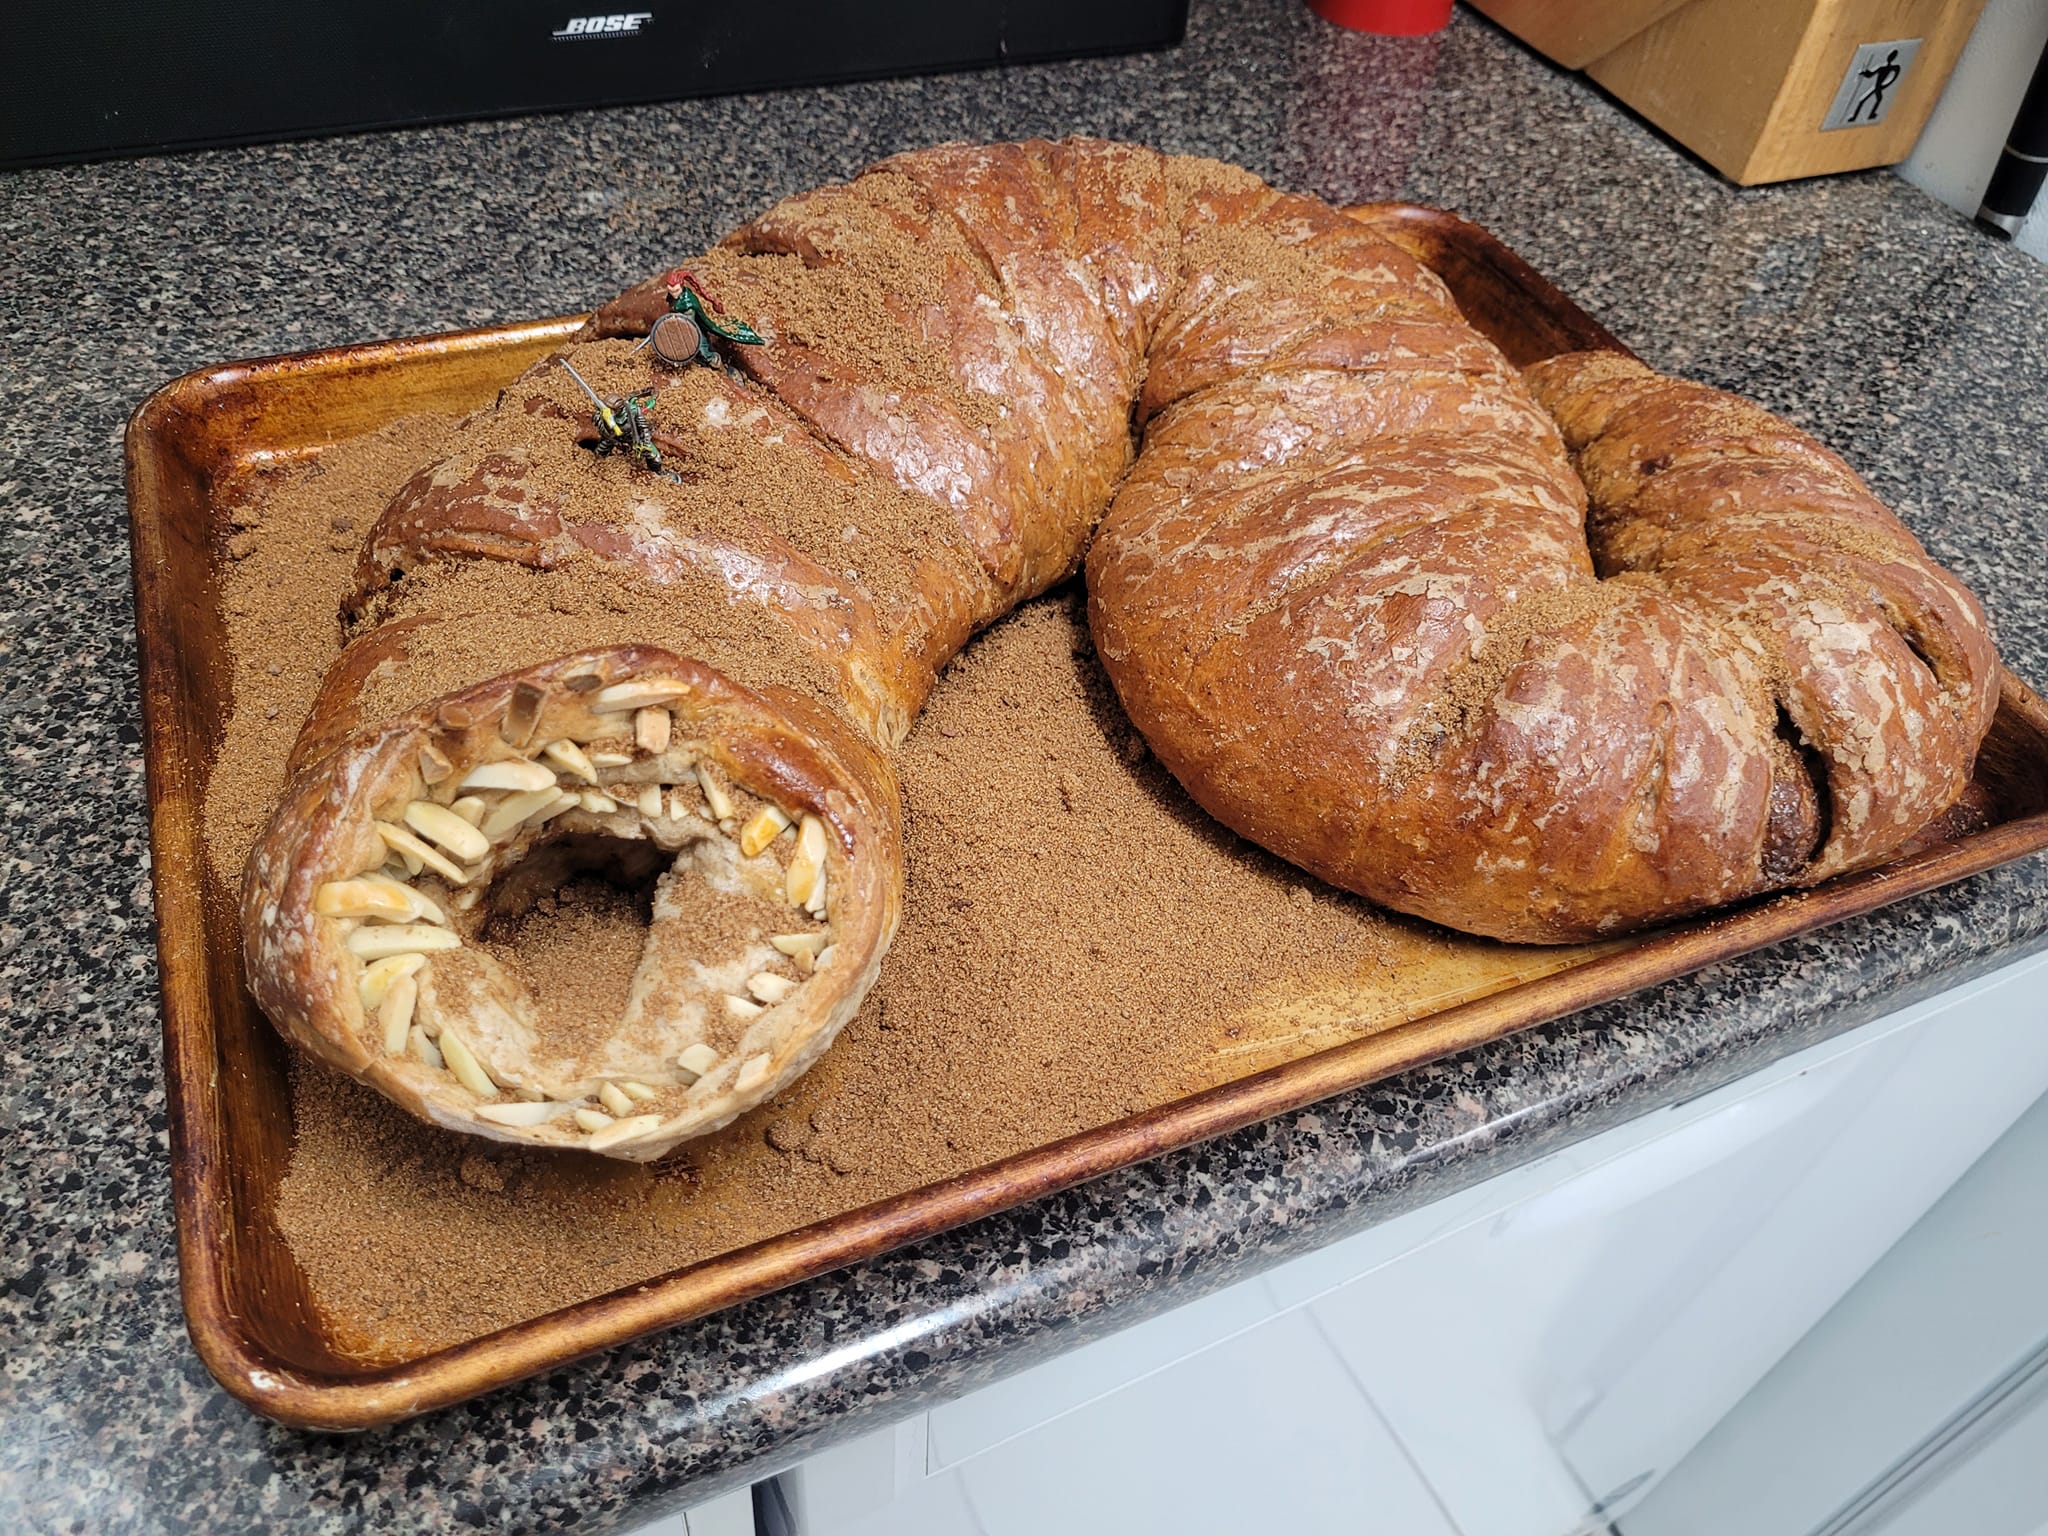 "I made Spicy Shai Khulud stuffed with cinnamon and cloves!": shocking photos of a culinary experiment that scares and attracts at the same time